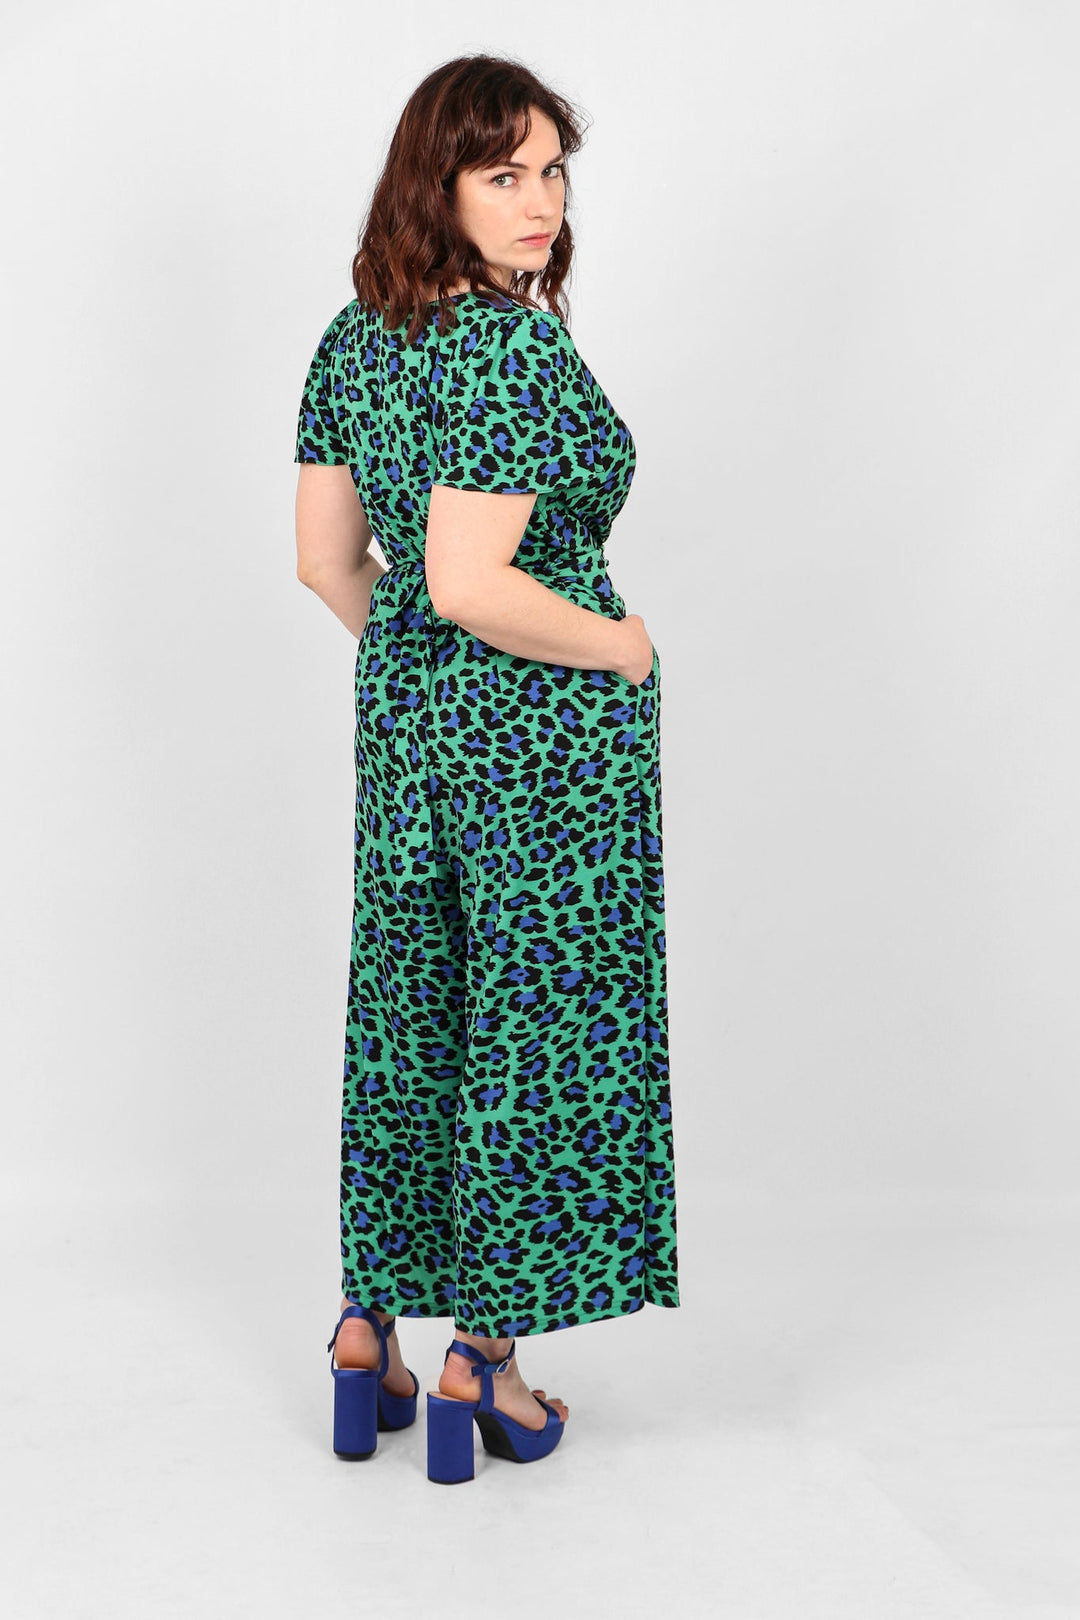 Model showing back of green and navy blue jumpsuit with tie waist